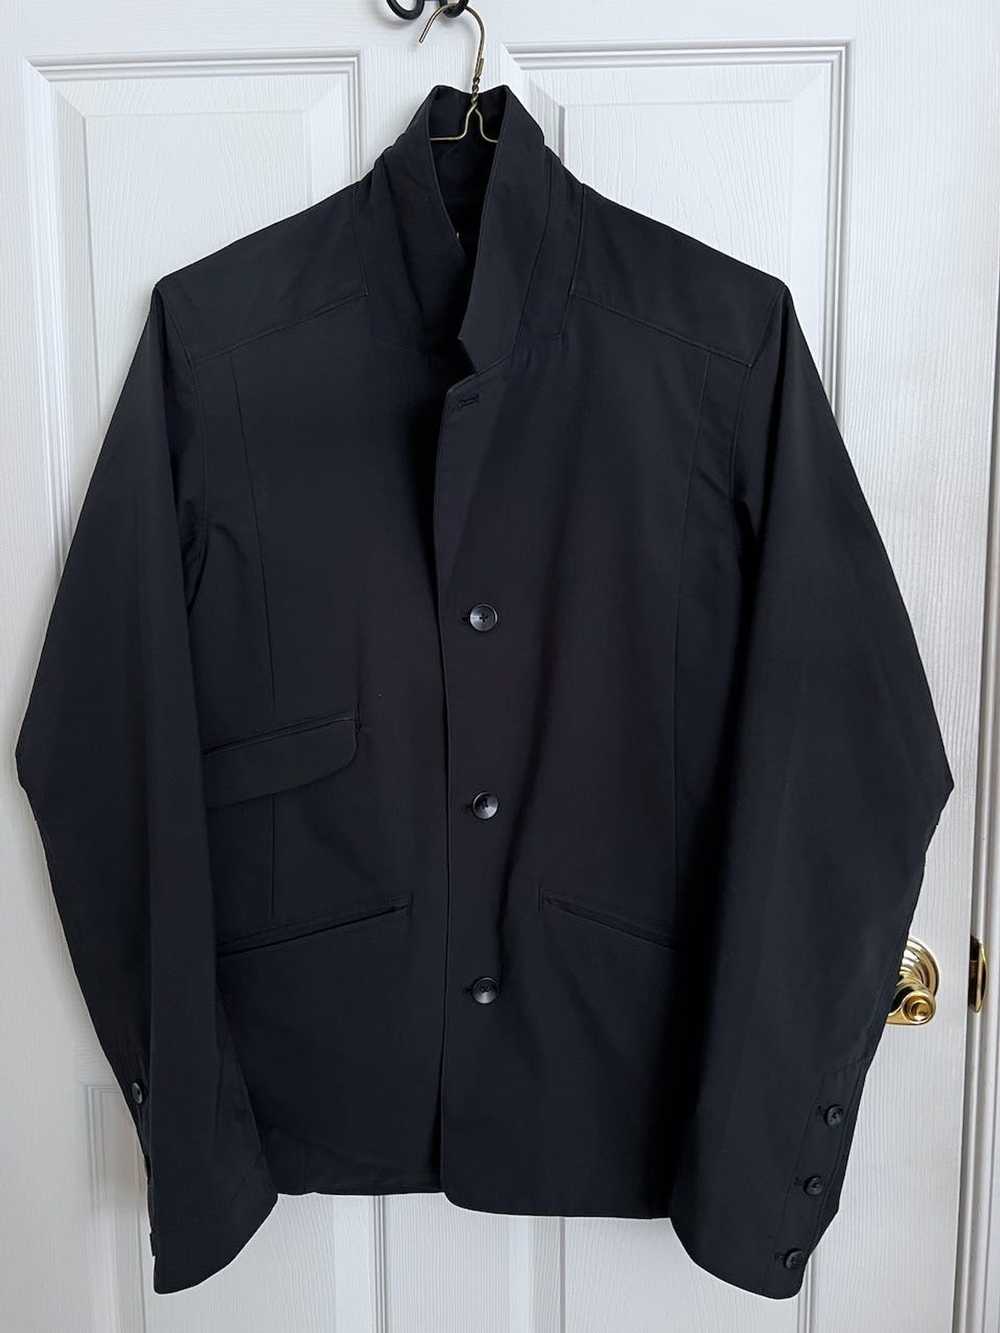 Nau Stretch Recycled Polyester Commuter Jacket - image 7